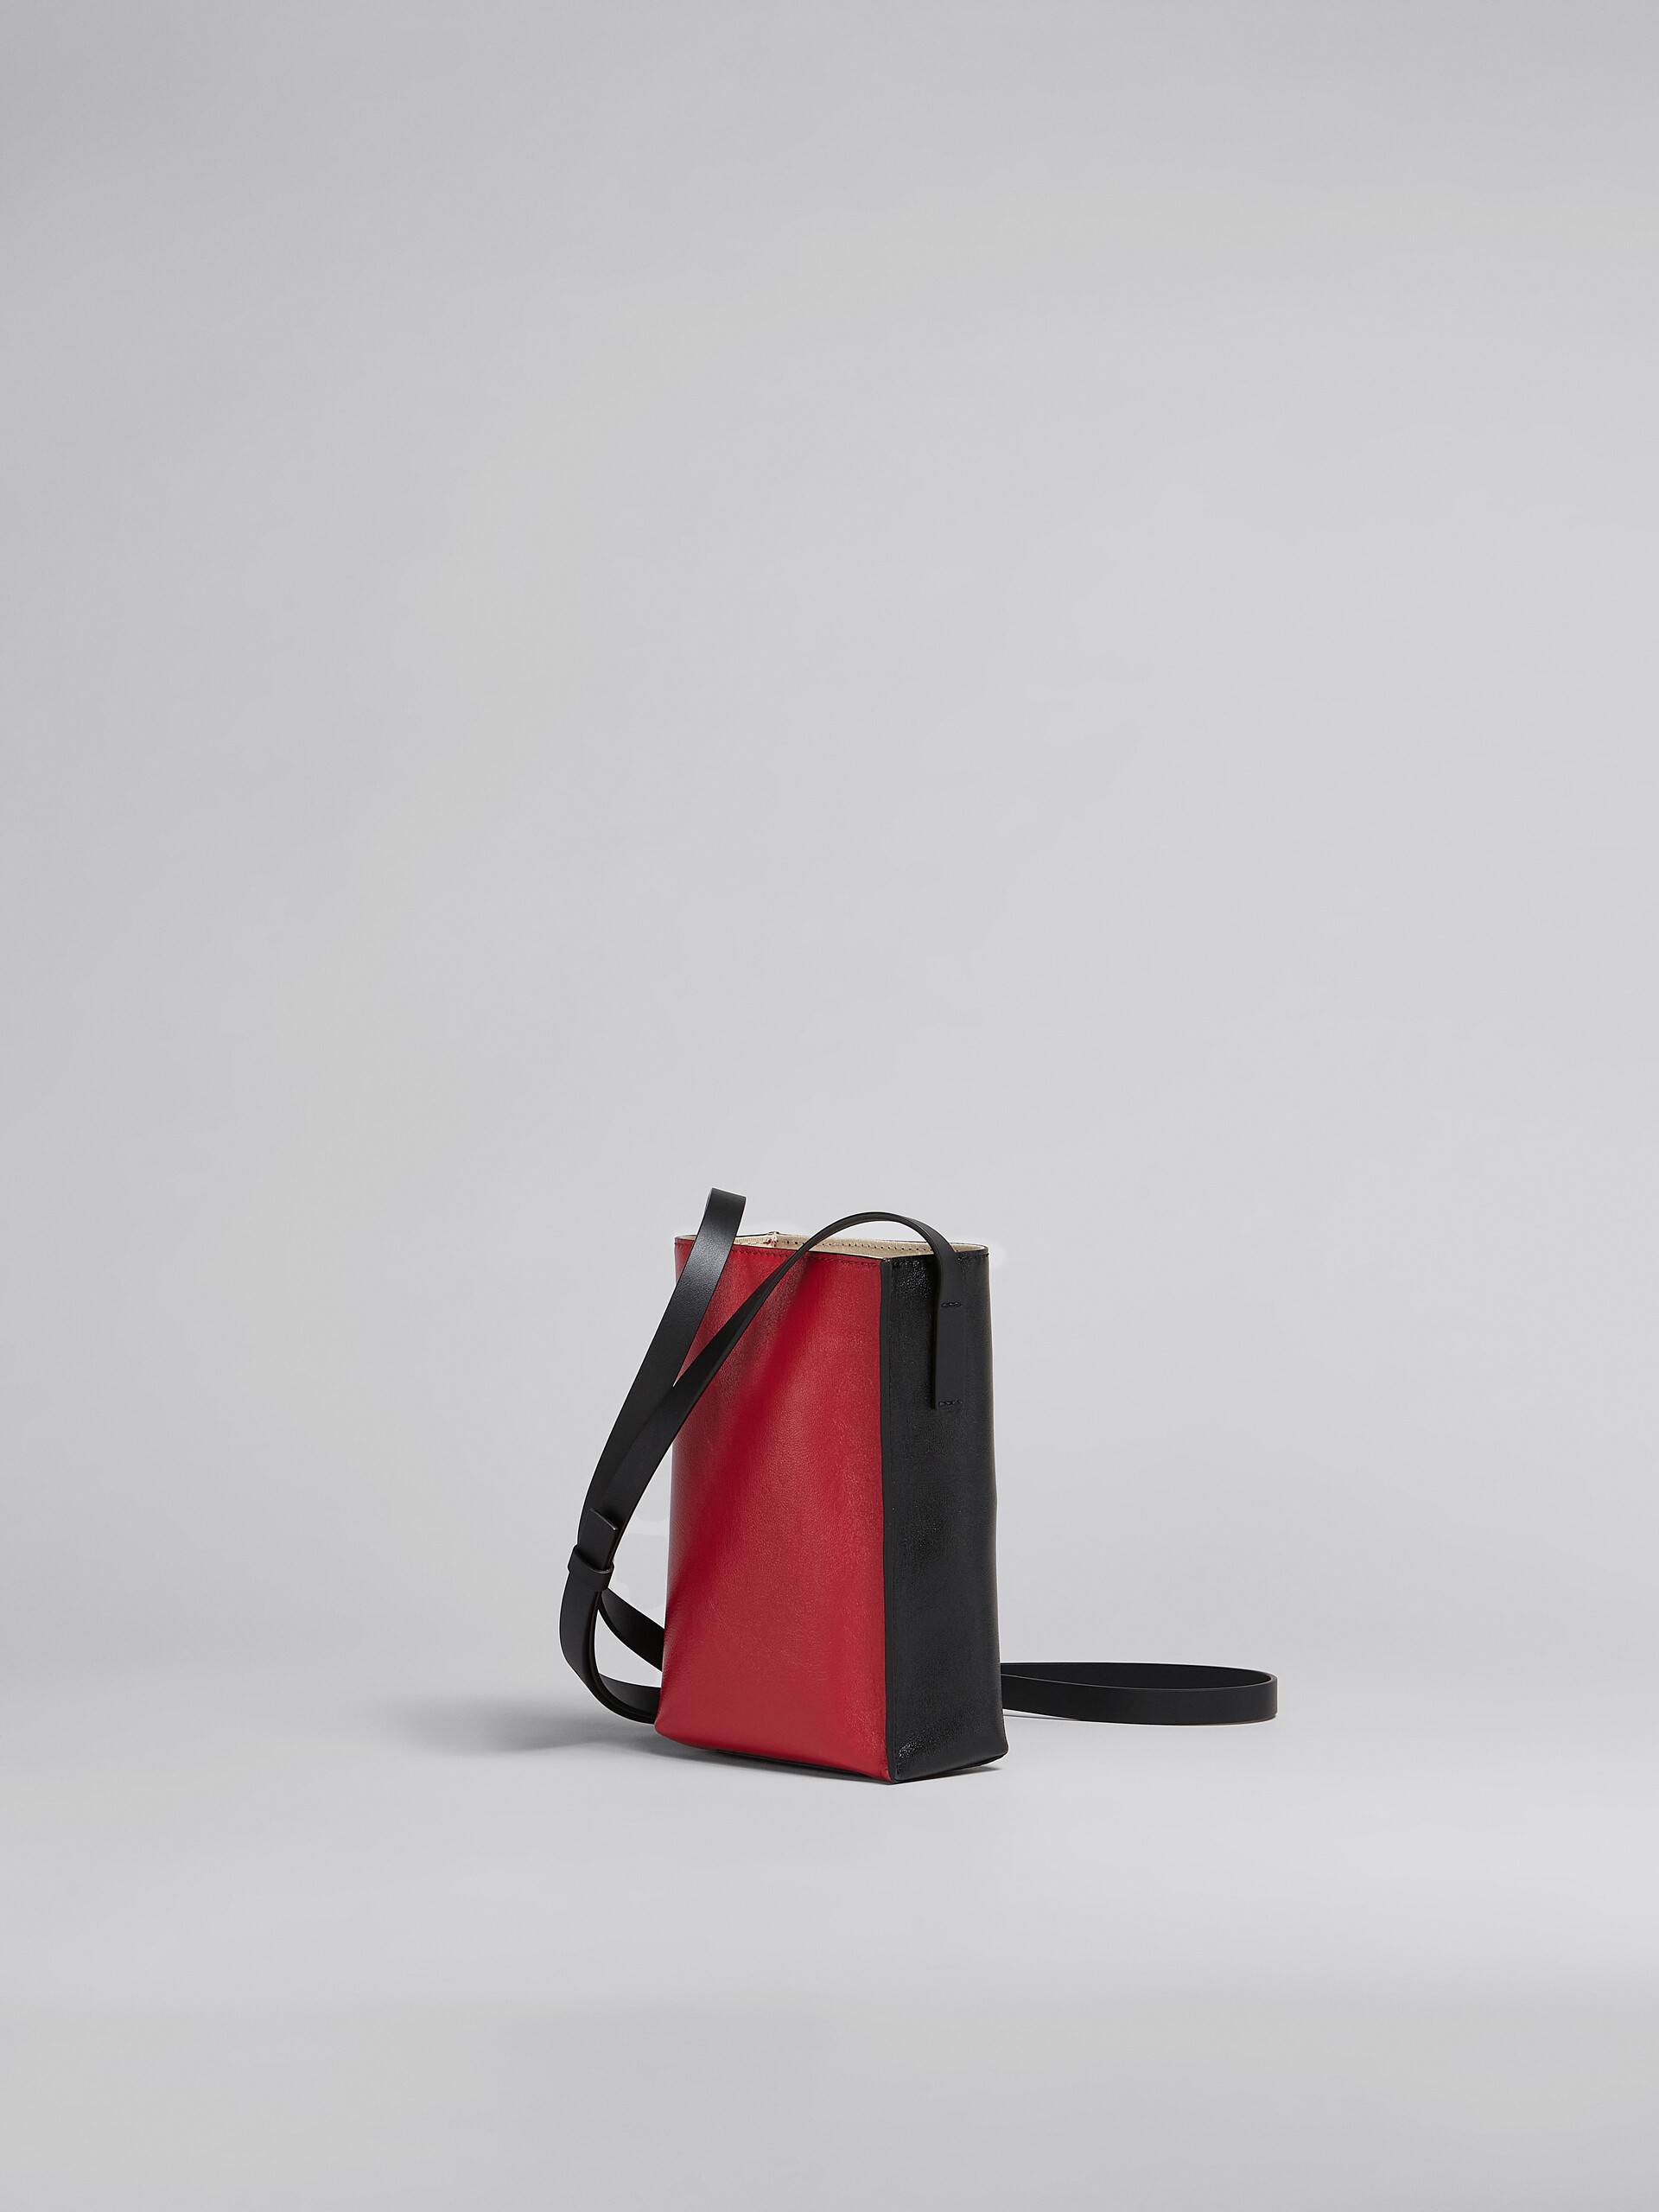 Museo Soft Small Bag in black and red leather - Shoulder Bags - Image 3